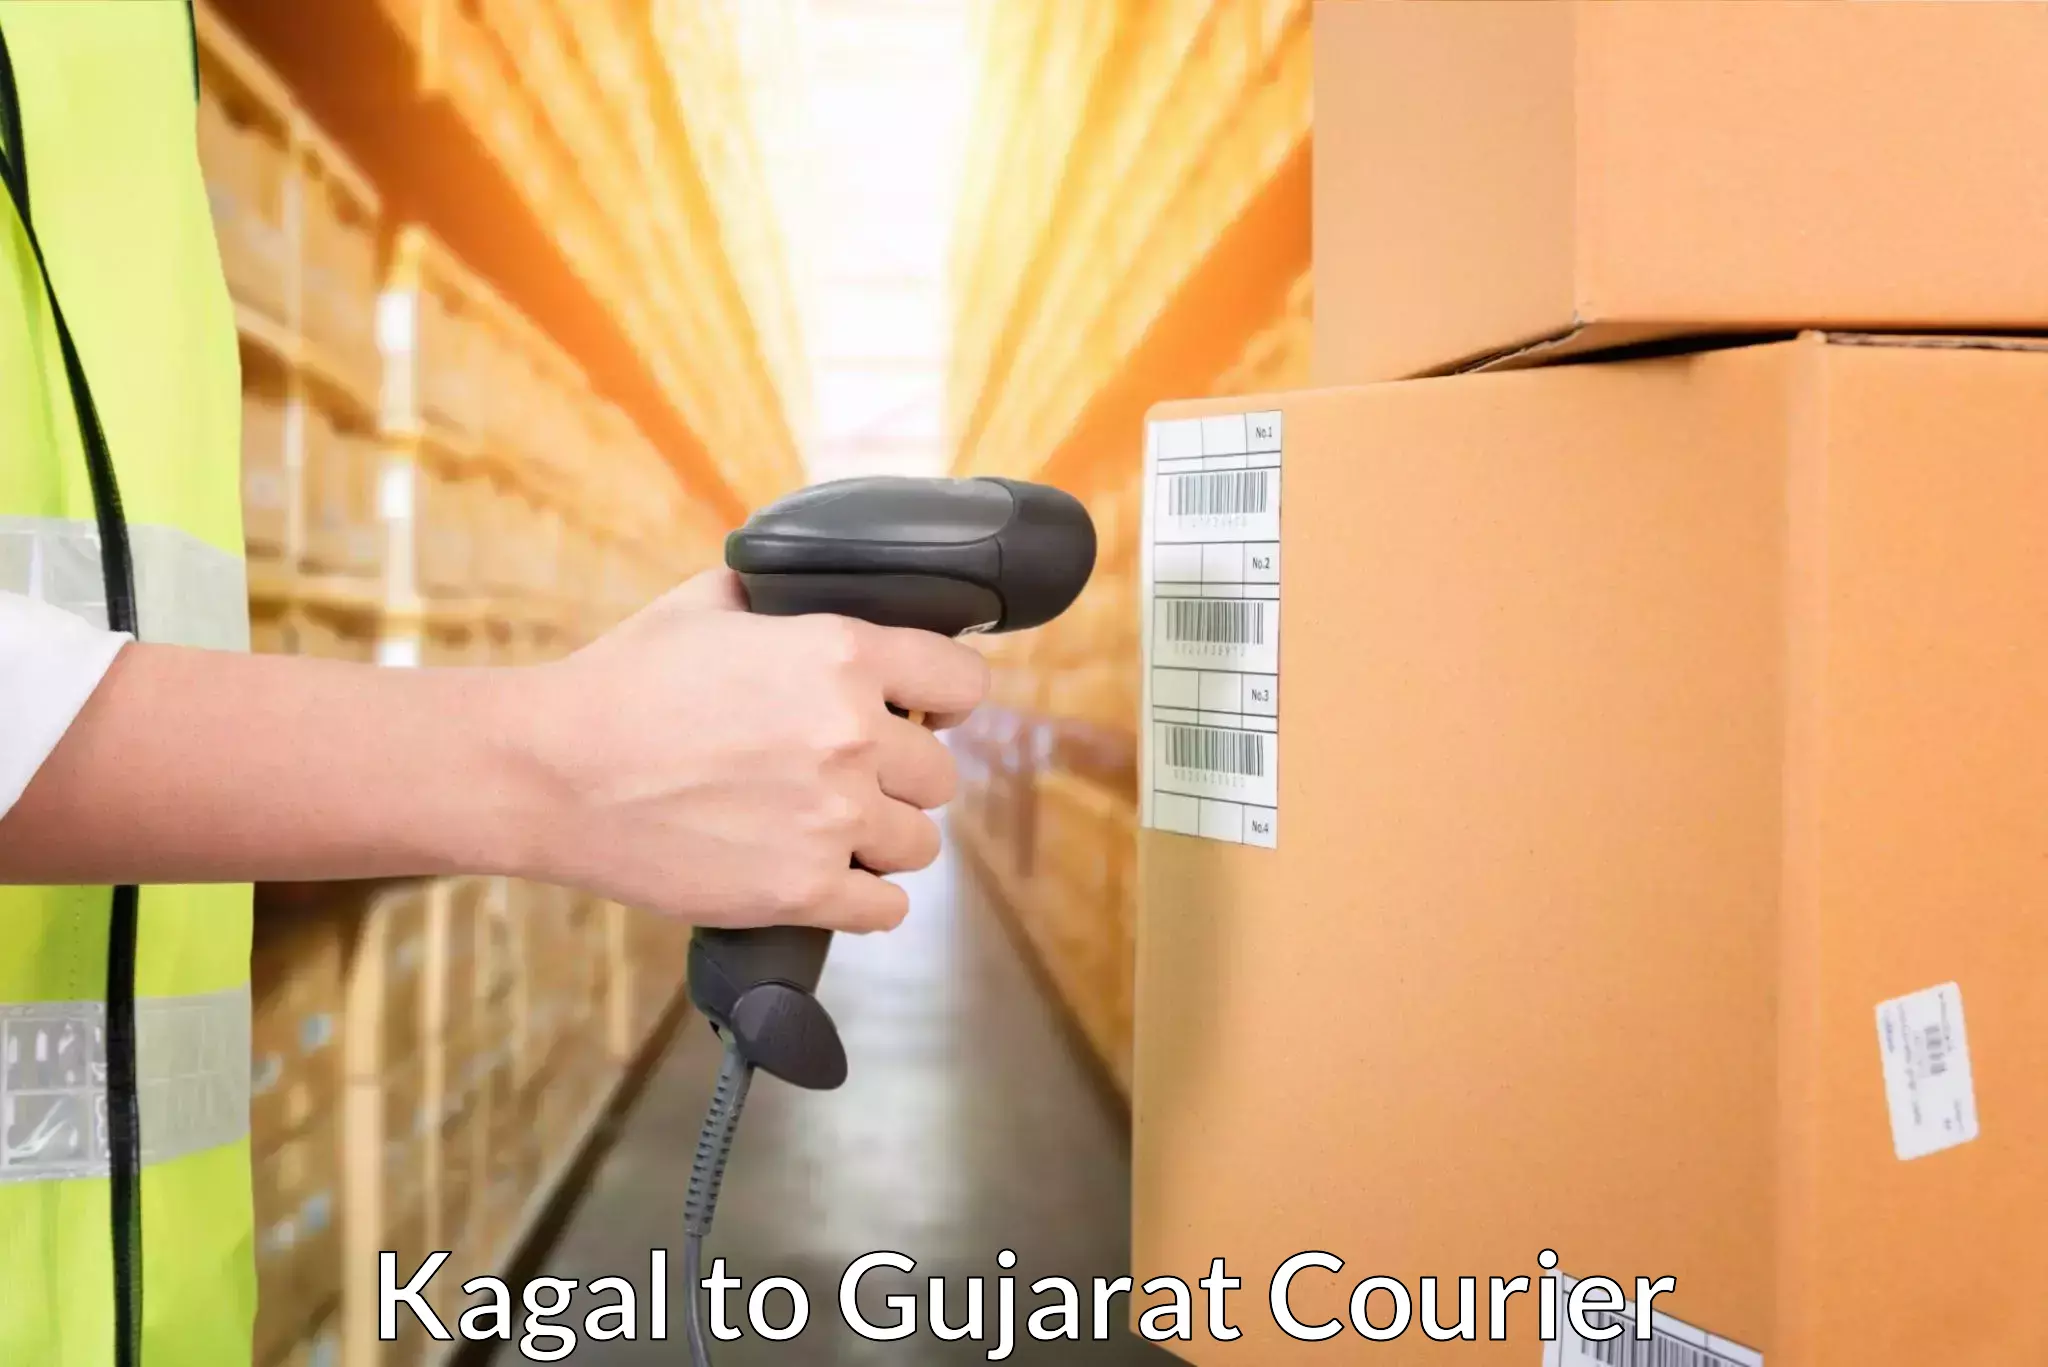 Full-service courier options Kagal to Valsad